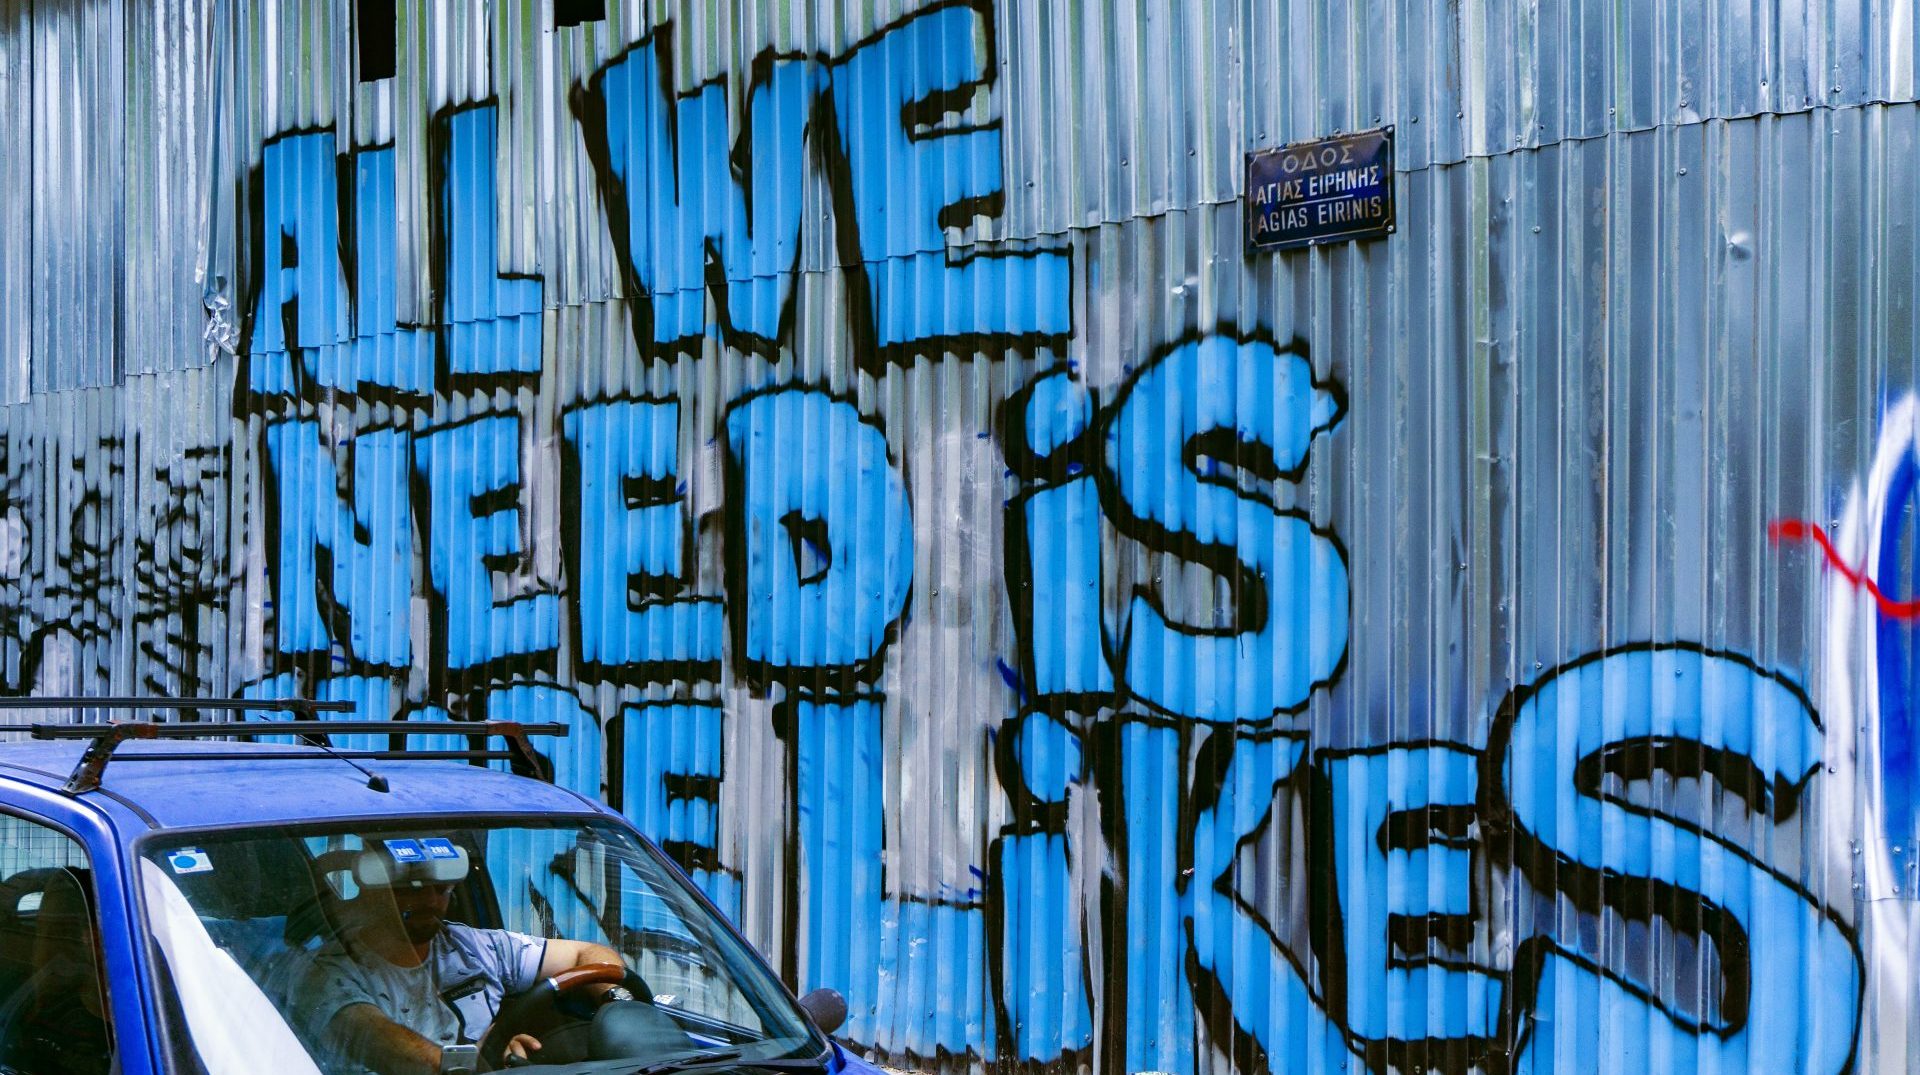 Graffiti in Greece that says 'All we need is more likes'. Stung by social media reverses, publishers are thinking more clearly about the value exchange with platforms. Photo by Daria Nepriakhina from Unsplash